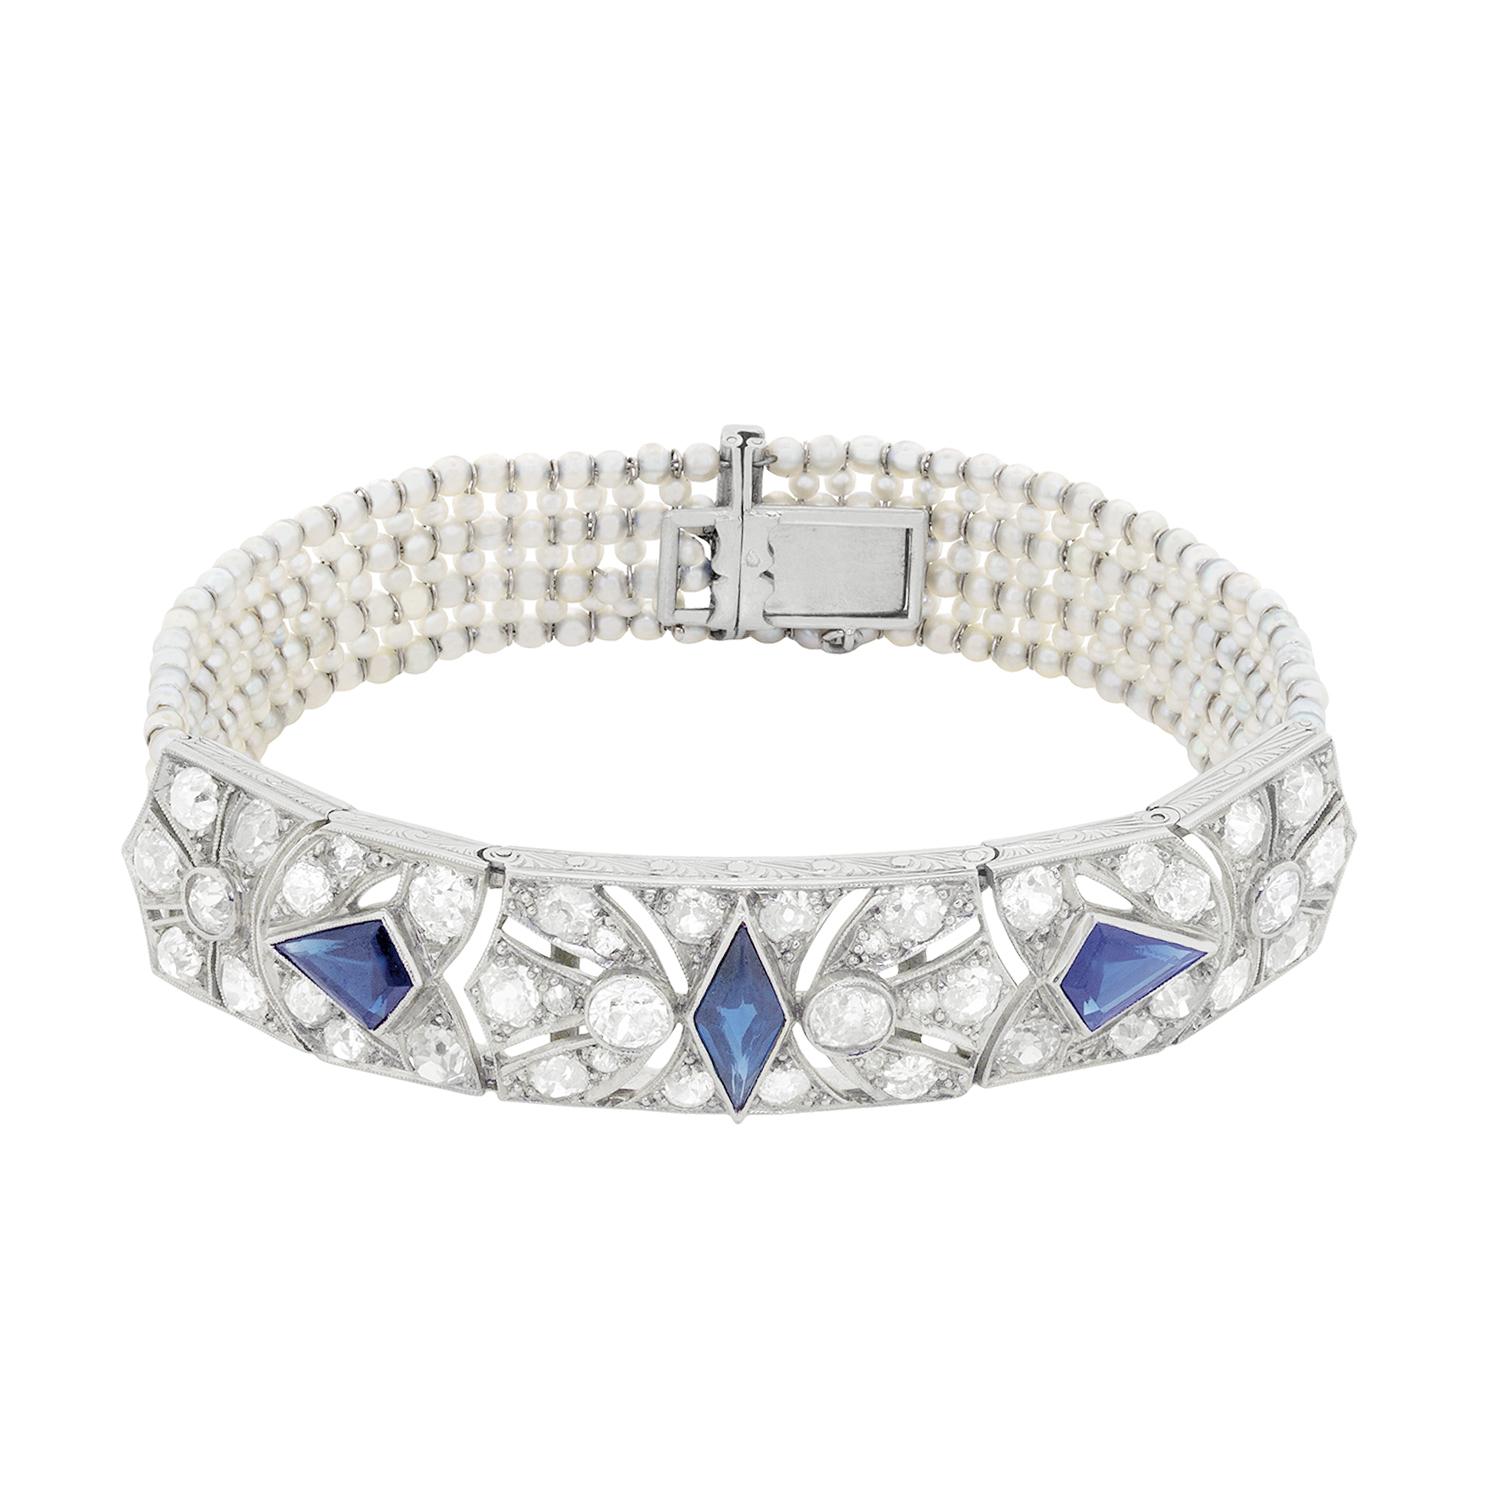 This beautiful and elegant bracelet dates back to the 1920s and is French in origin. The main attraction is the three rub over set diamonds in the centre of the piece. They have a combined weight of 3.00 carat and are a luscious deep blue. The rub